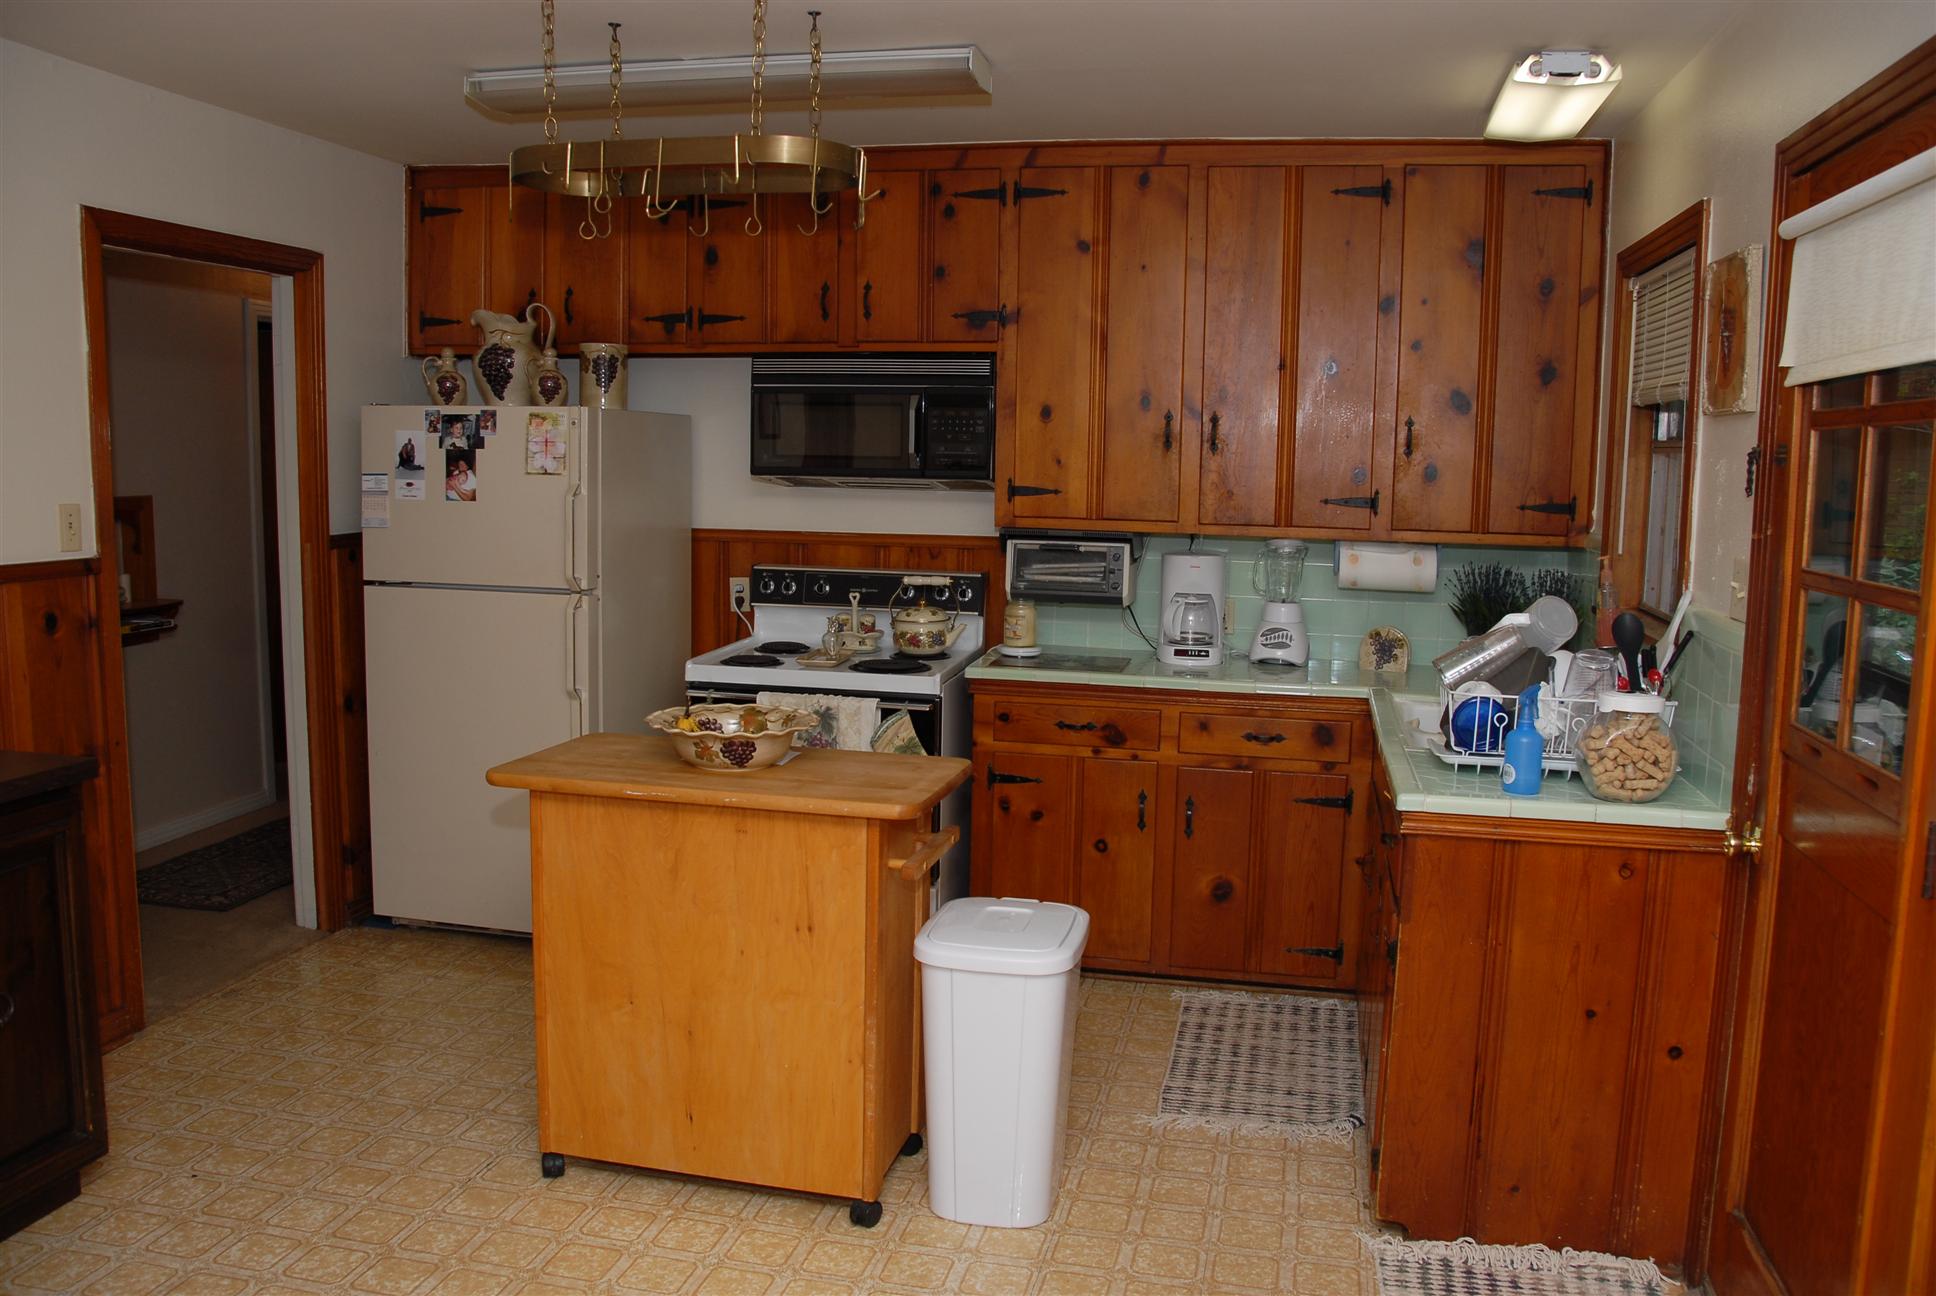 View of kitchen, from dining area